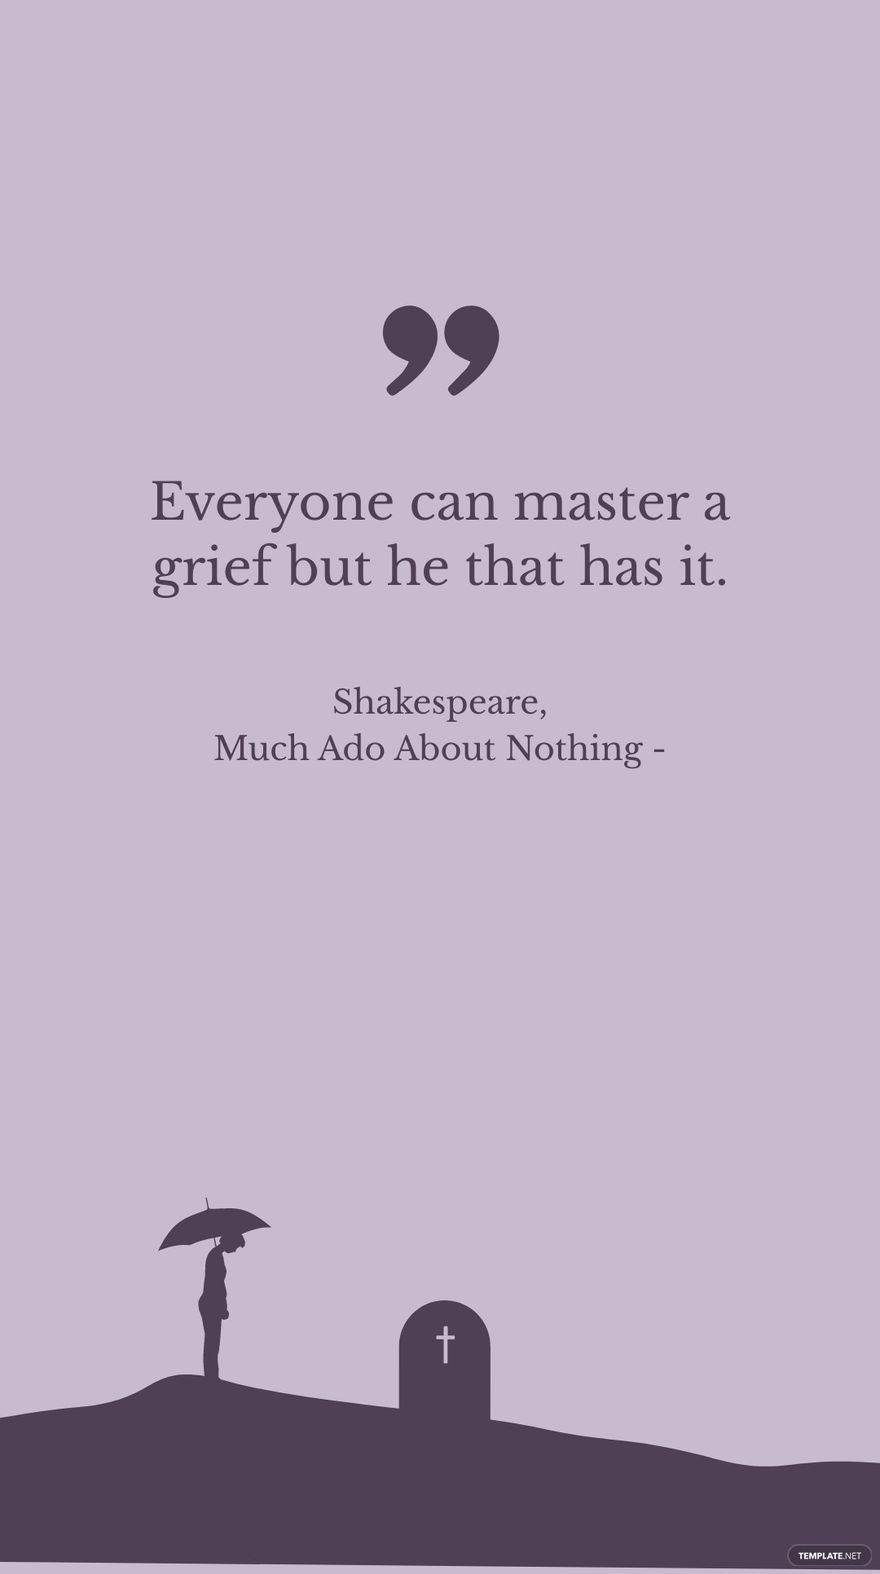 Shakespeare, Much Ado About Nothing - Everyone can master a grief but he that has it. in JPG